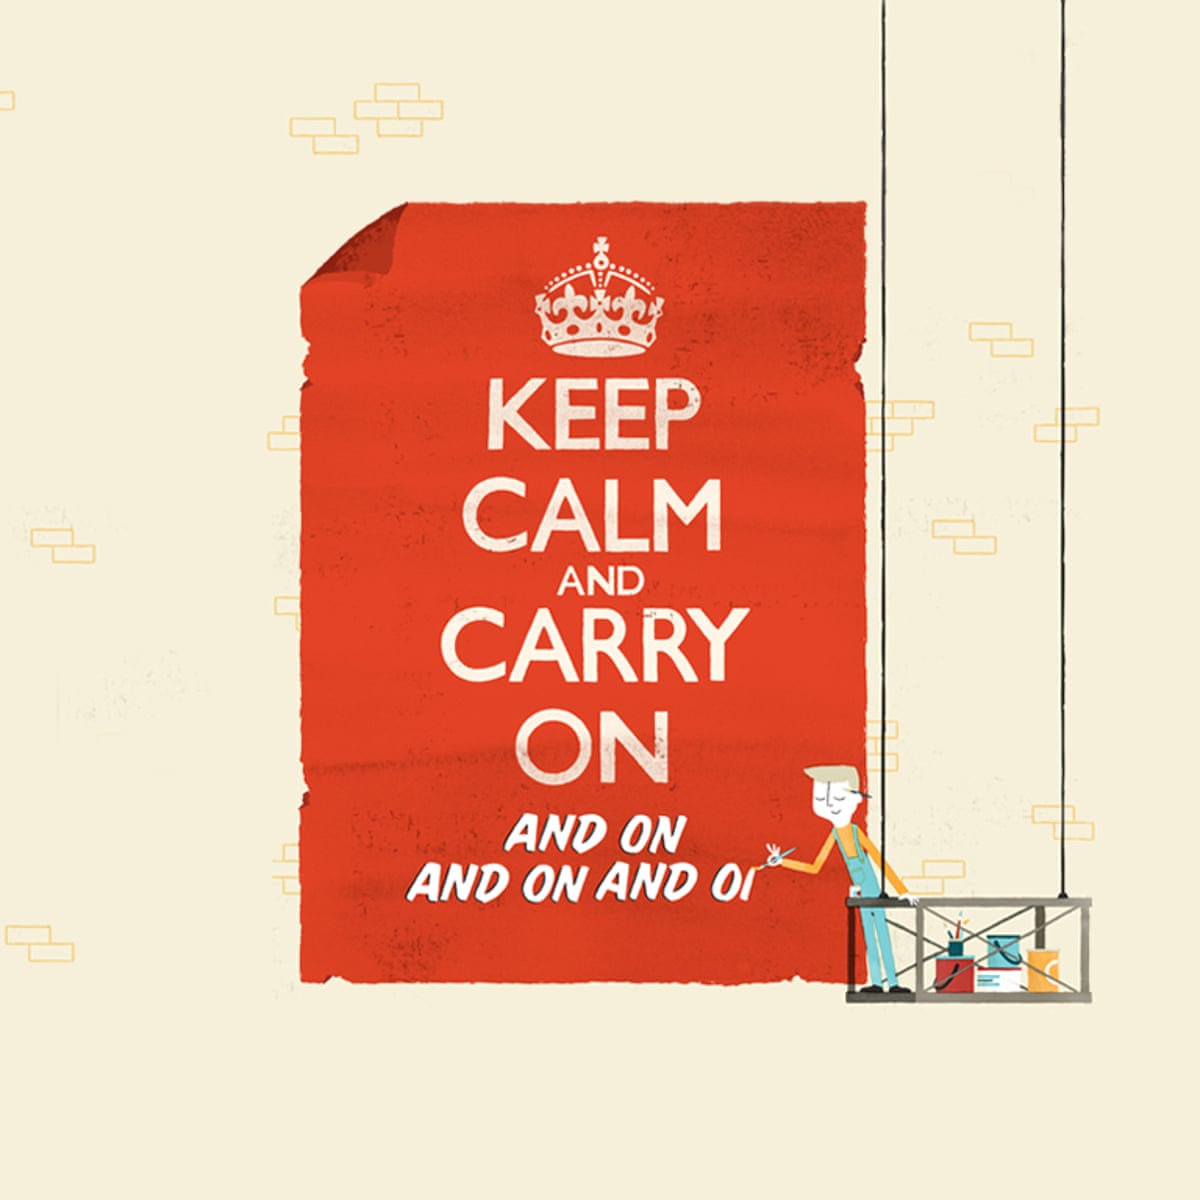 Keep Calm and Carry On – the sinister message behind the slogan ...